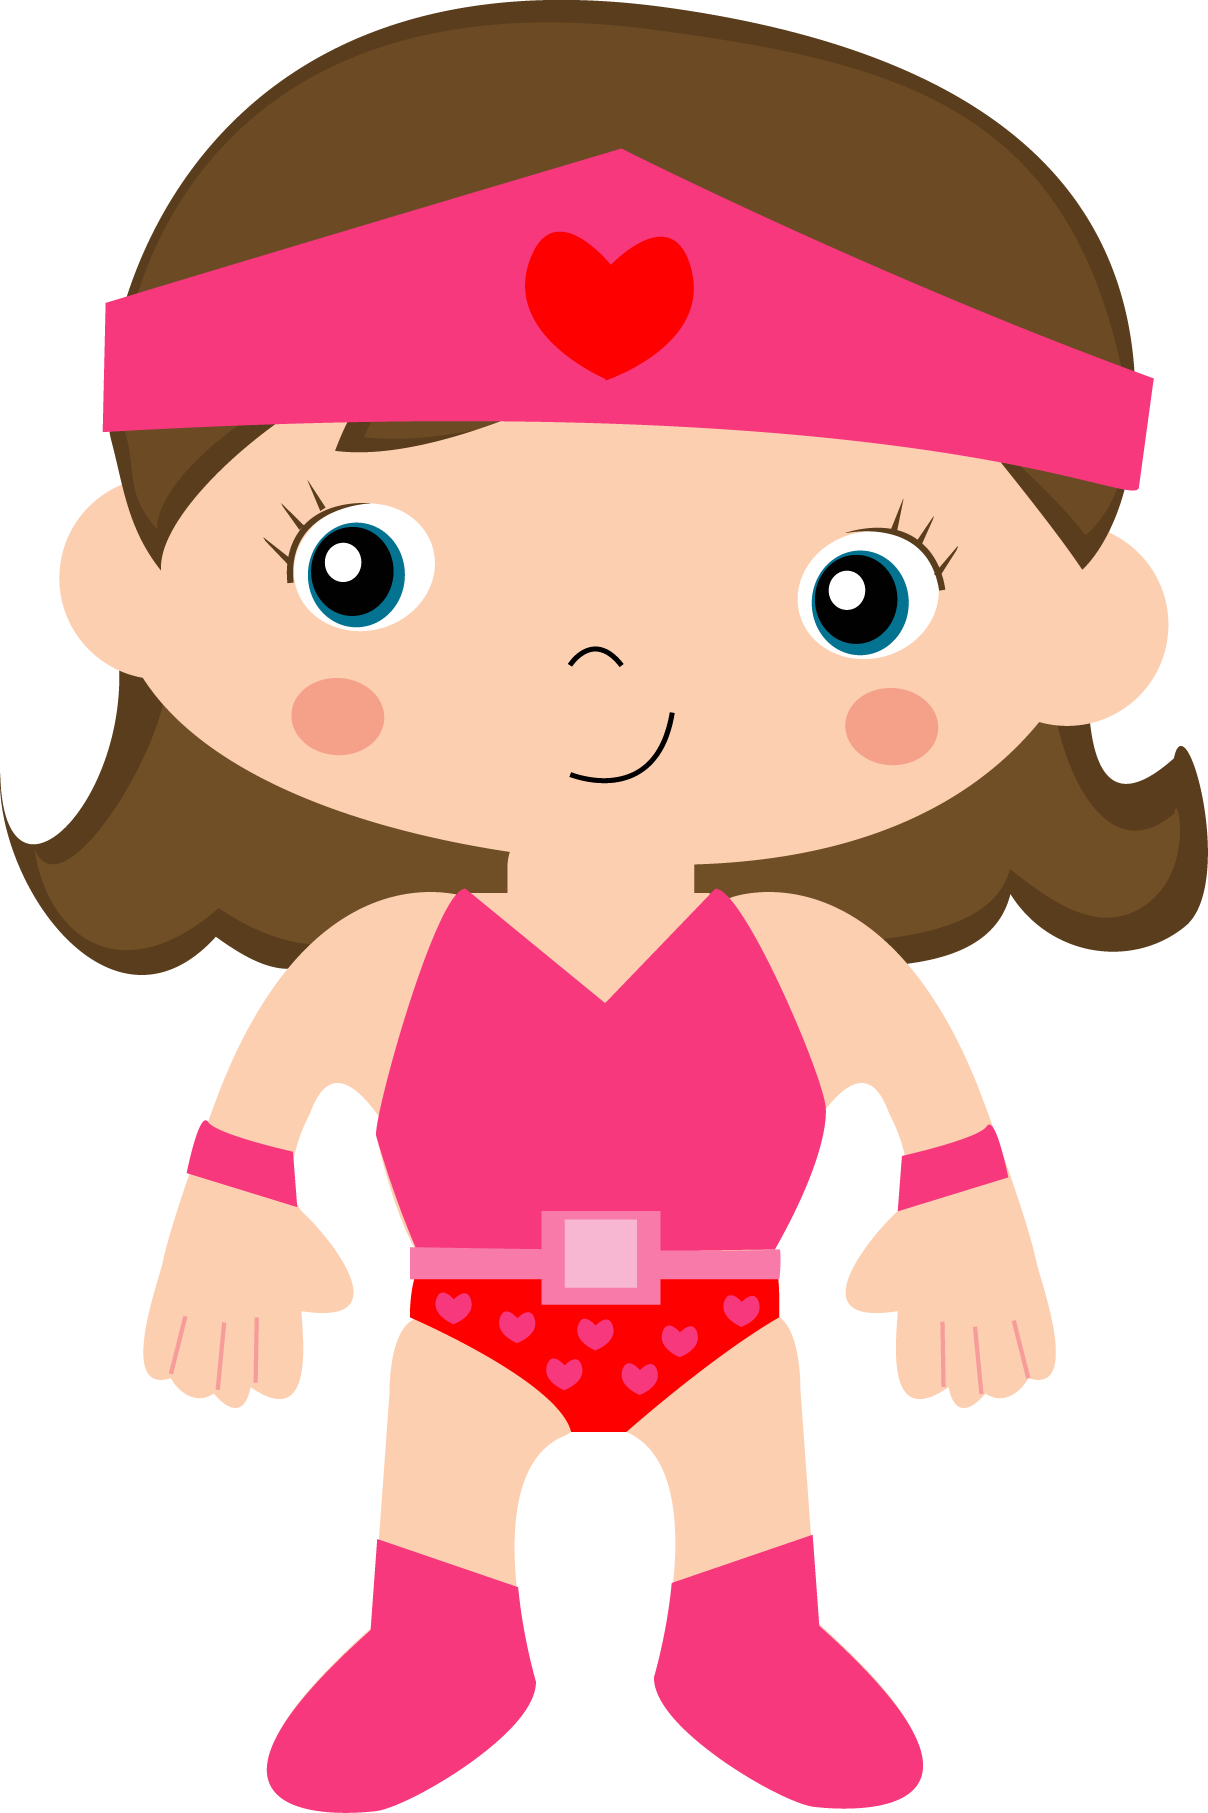 Pants clipart spotty. Super her is minus